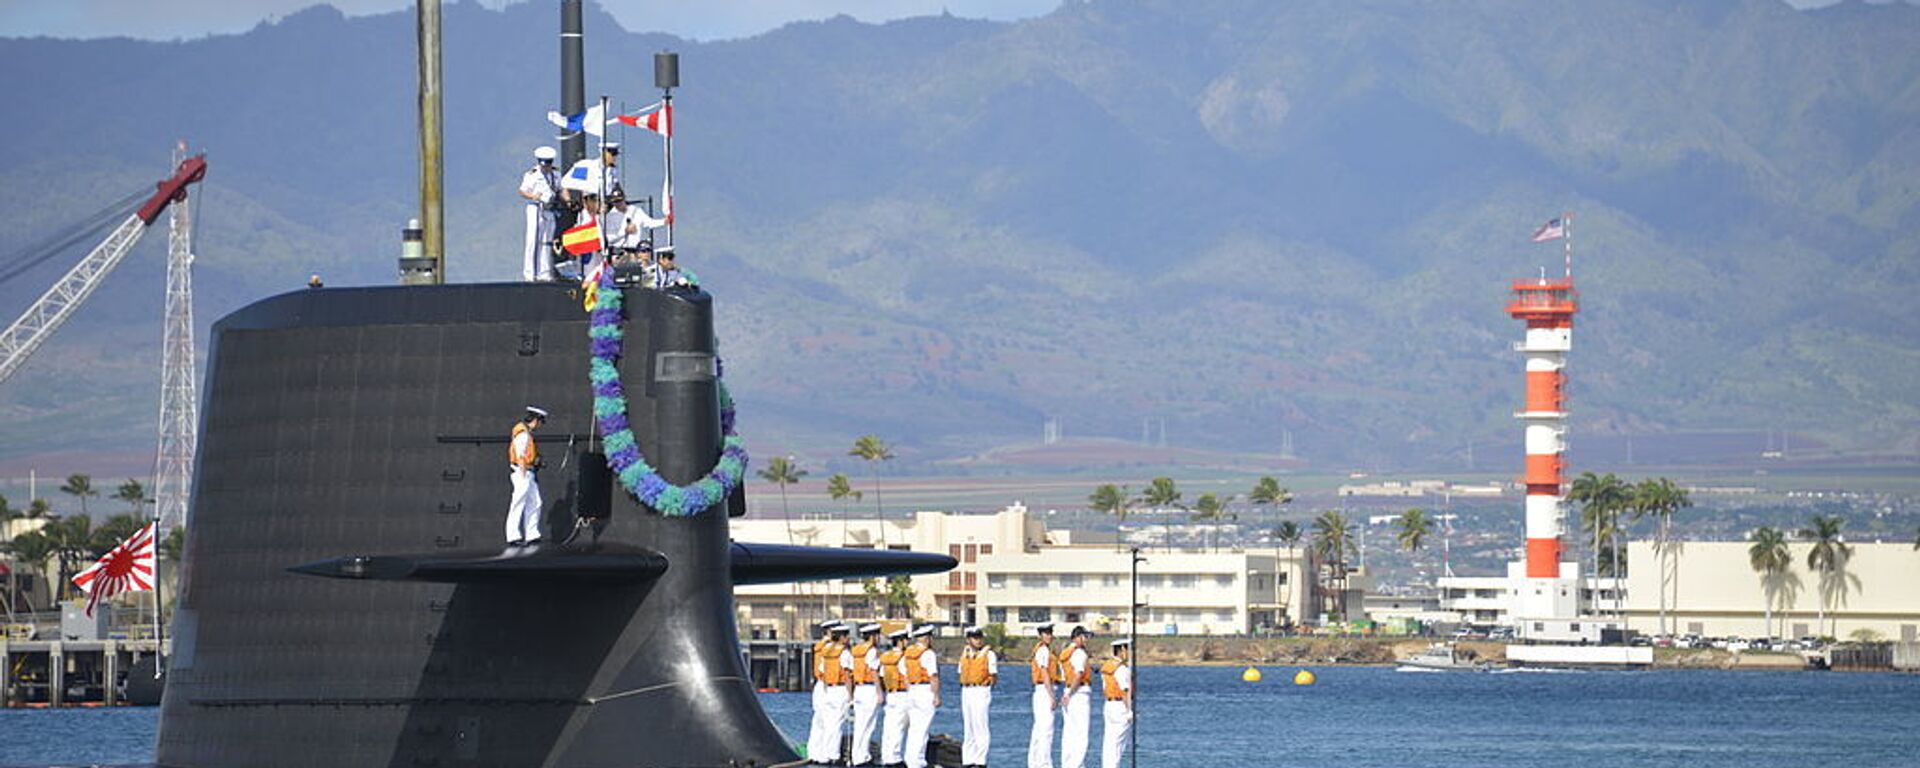 Japan Maritime Self Defense Force (JMSDF) submarine Hakuryu (SS-503) arrives at Joint Base Pearl Harbor-Hickam for a scheduled port visit, Feb. 6. While in port, the submarine crew will conduct various training evolutions and have the opportunity to enjoy the sights and culture of Hawaii.  - Sputnik International, 1920, 28.11.2022